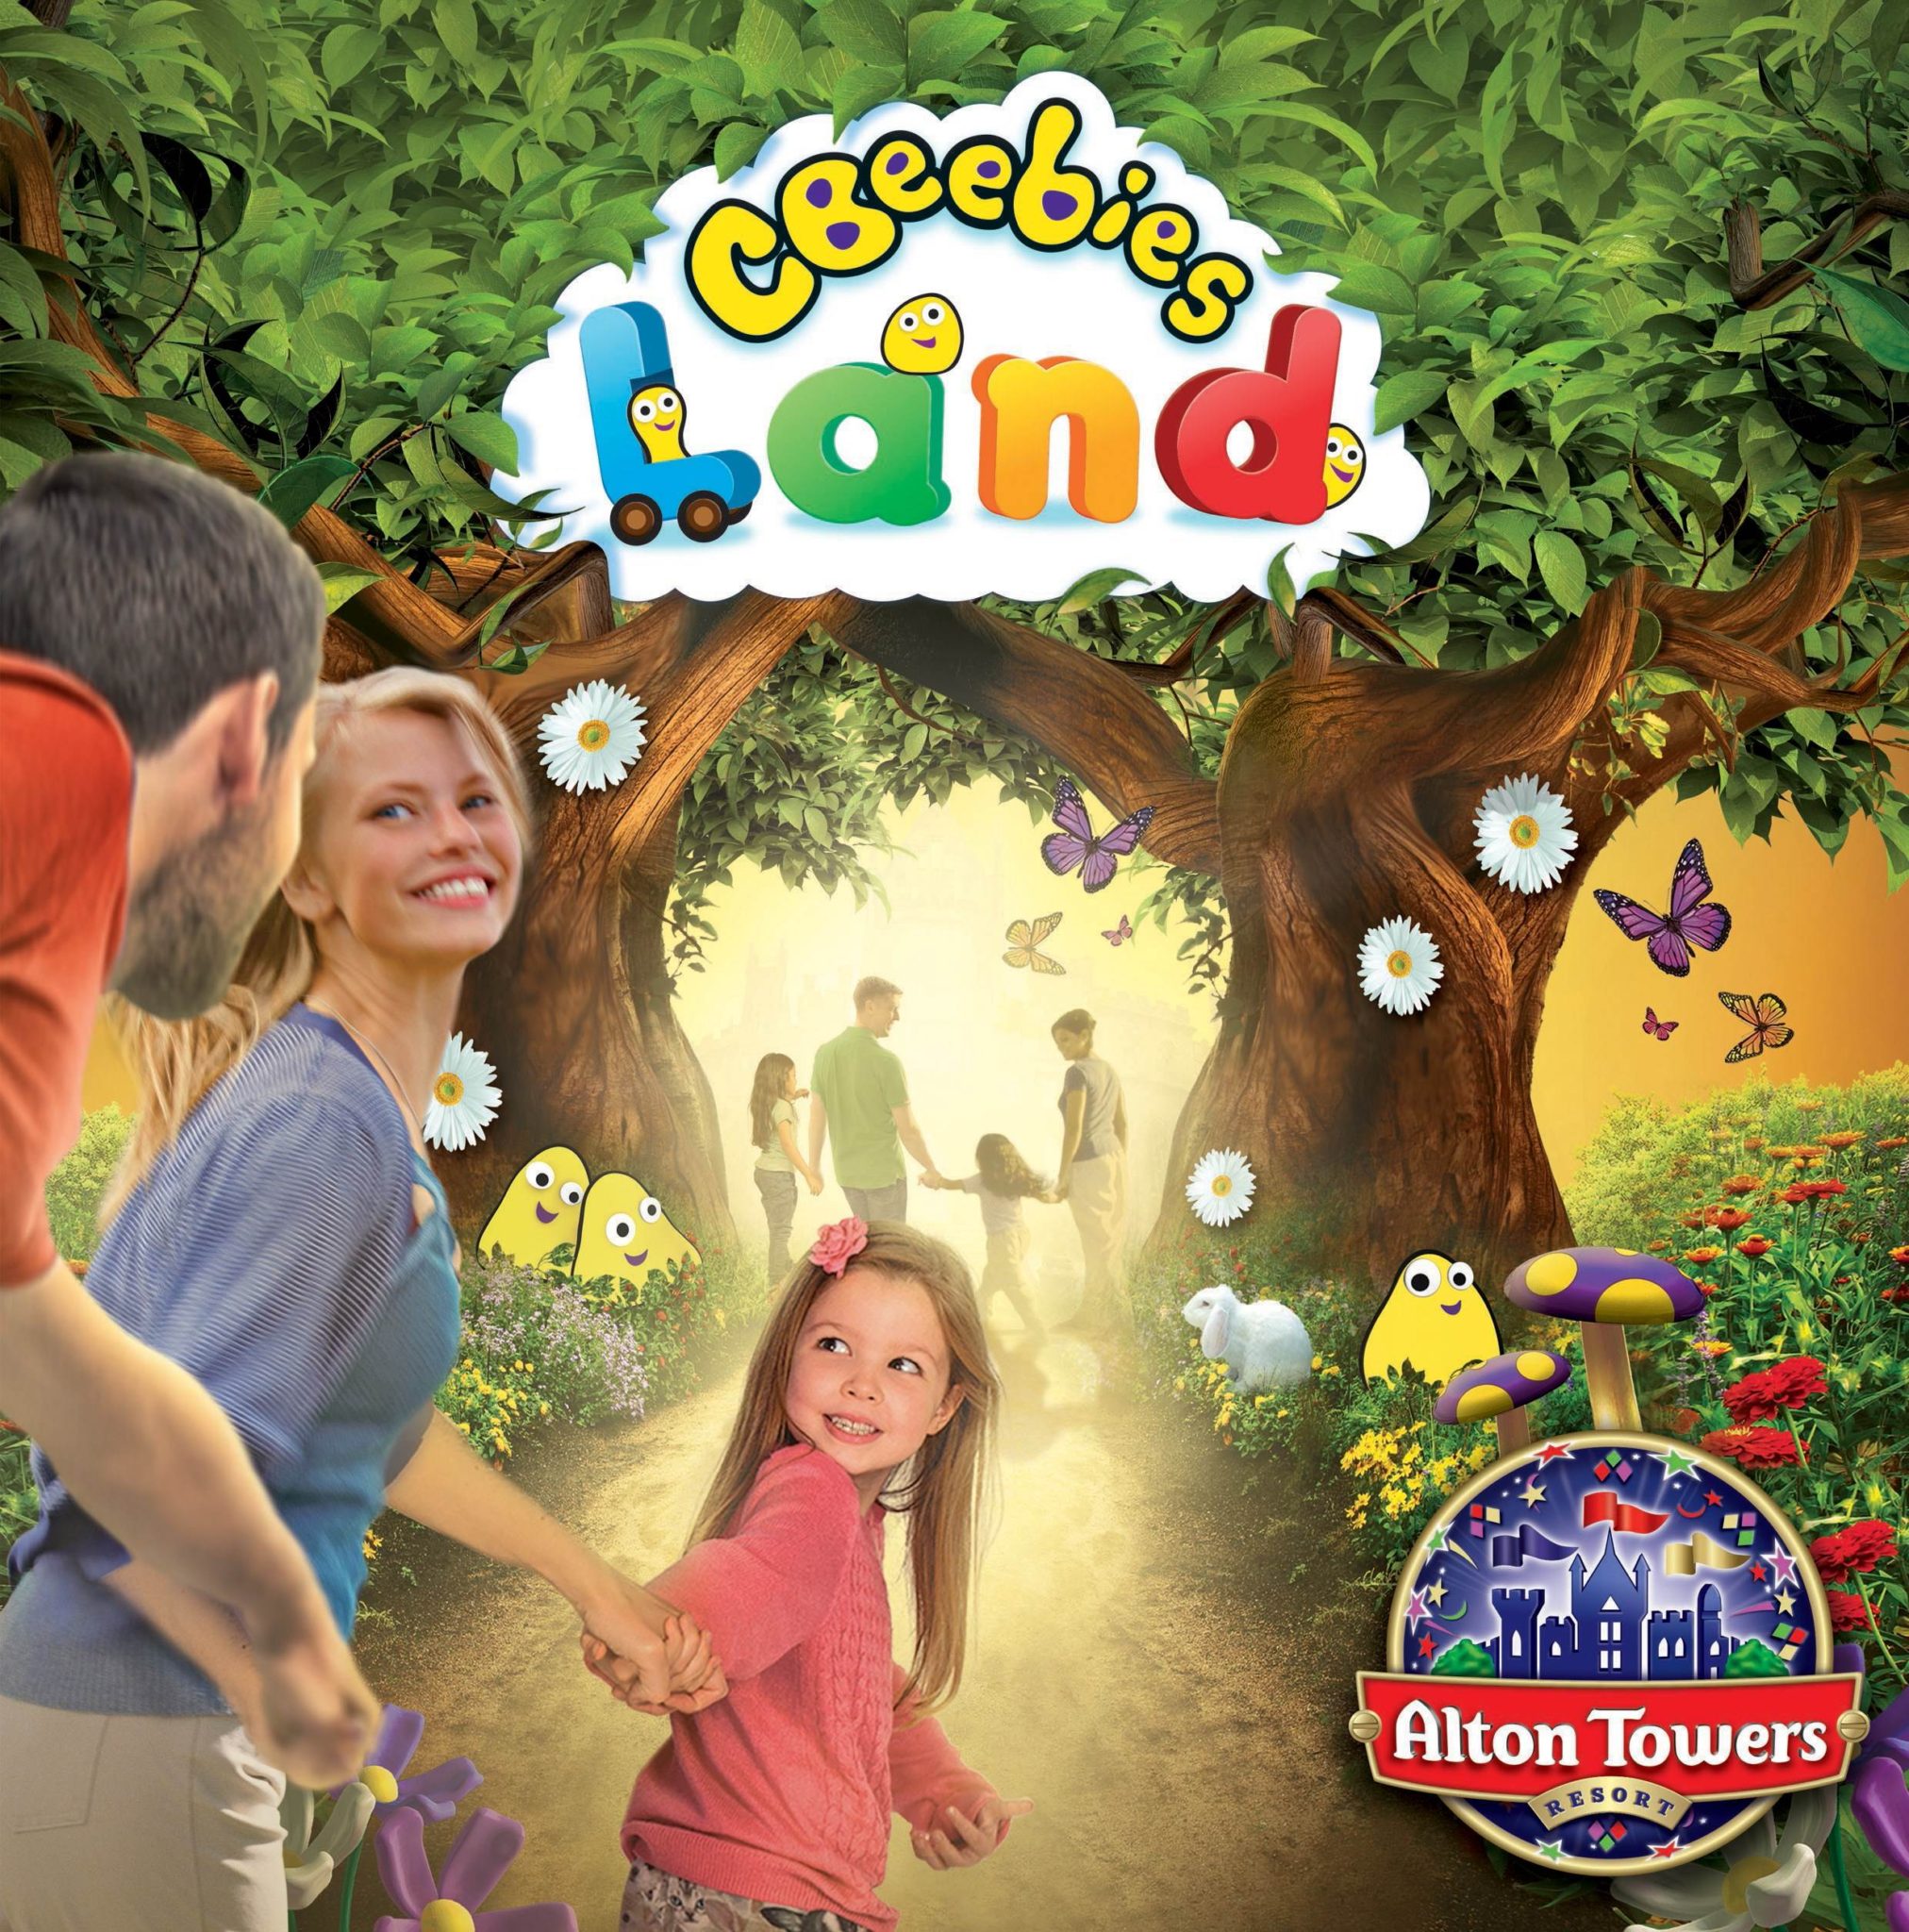 Alton Towers Resort to launch world’s first CBeebies Land